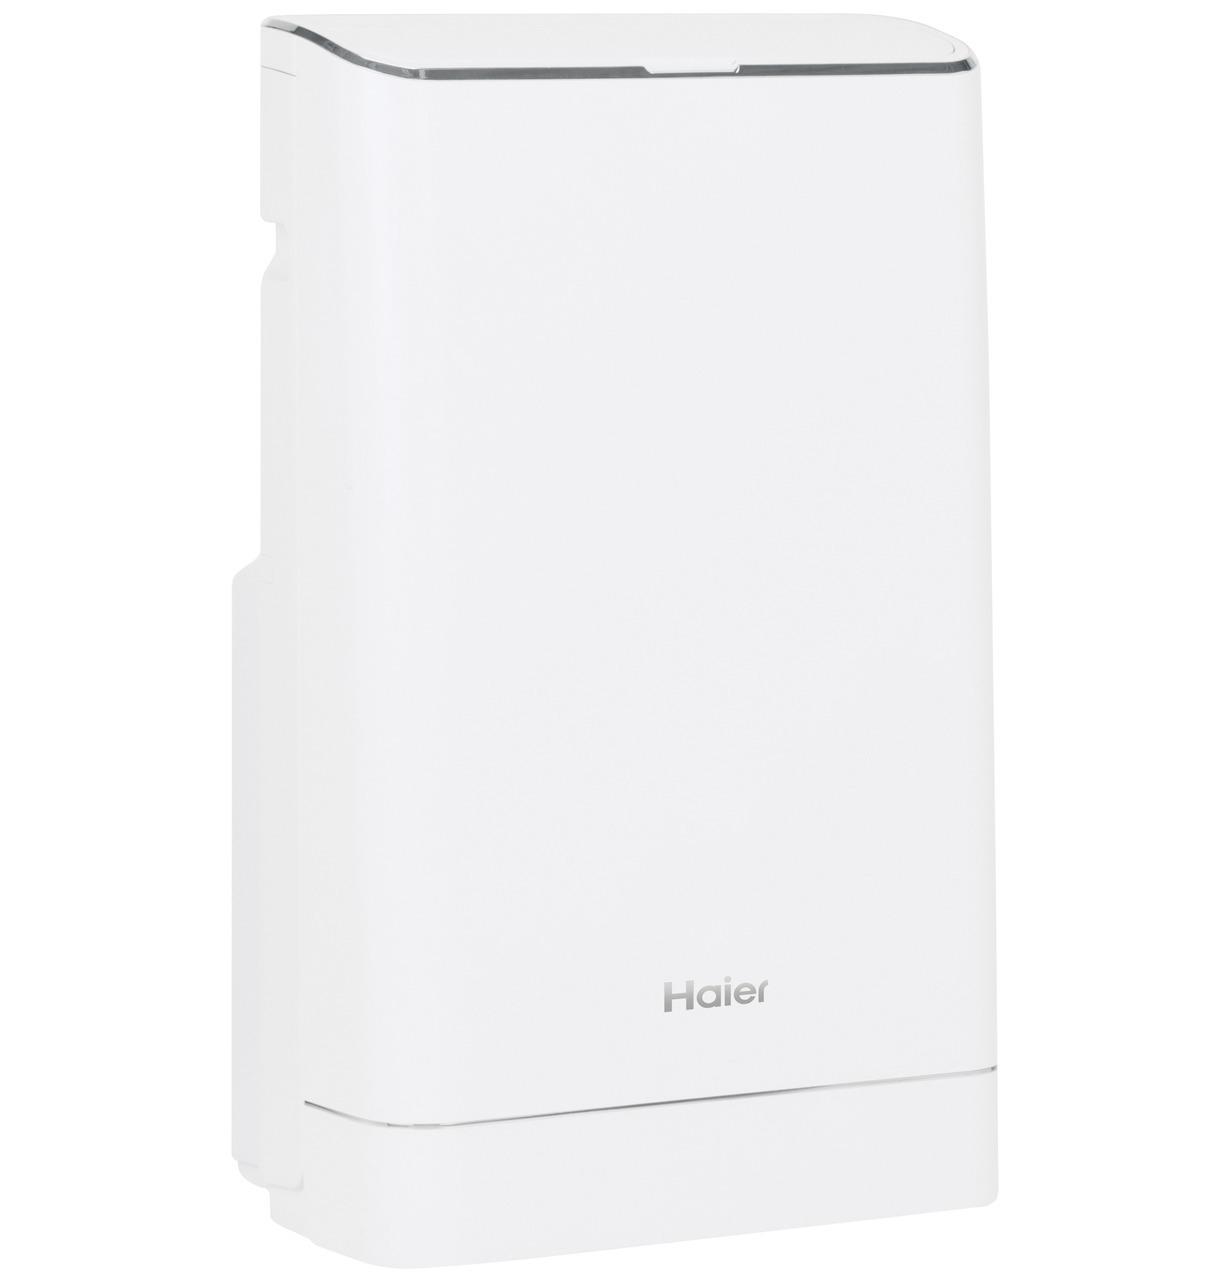 Haier® Portable Air Conditioner with Dehumidifier for Large Rooms up to 550 sq. ft., 13.500 BTU (9,700 BTU SACC)